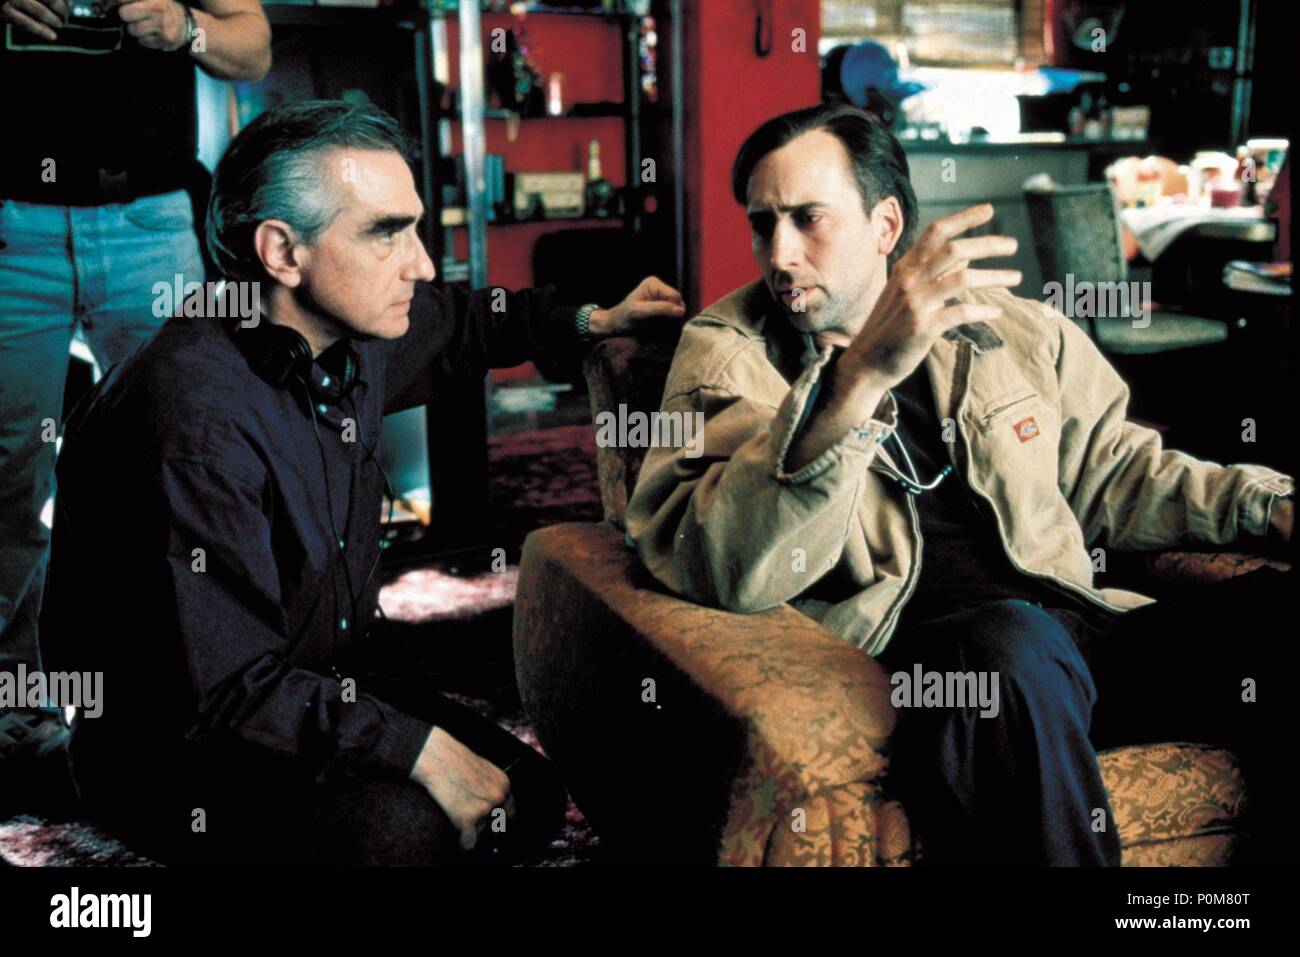 Martin Scorsese & Nicolas Cage Film: Bringing Out The Dead (1999)  Characters: Dispatcher (voice) & Frank Pierce Director: Martin Scorsese 22  October 1999 **WARNING** This Photograph is for editorial use only and